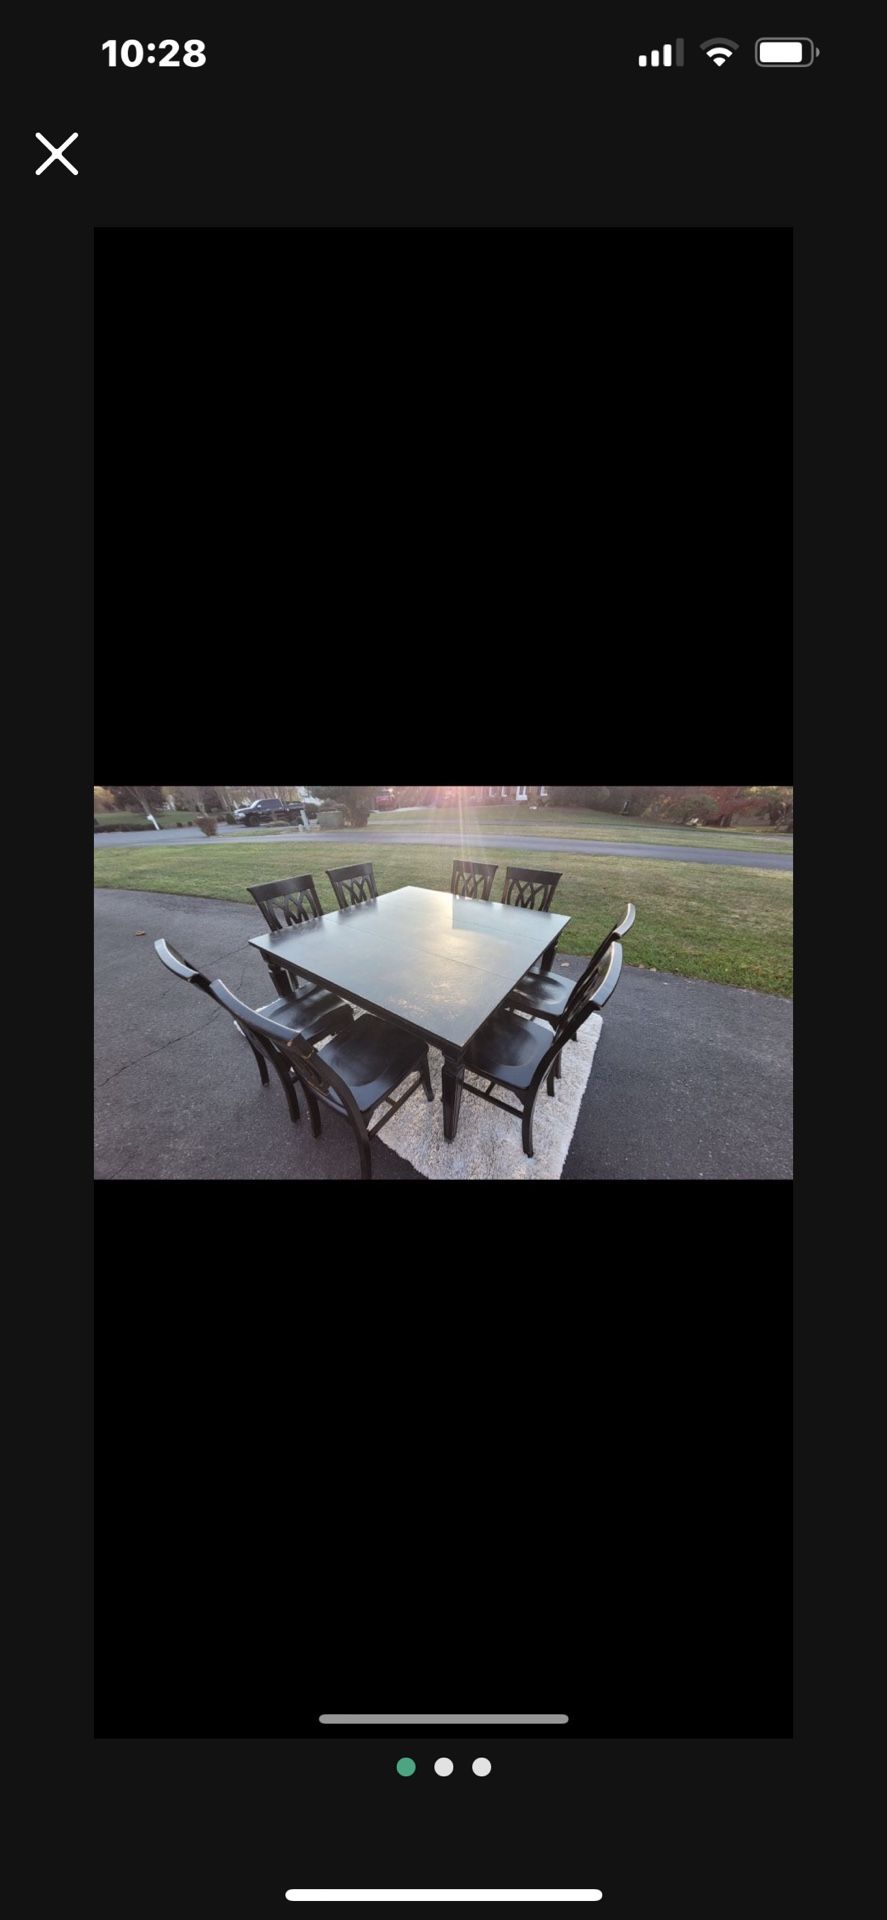 Kitchen Table With 6 Chairs 